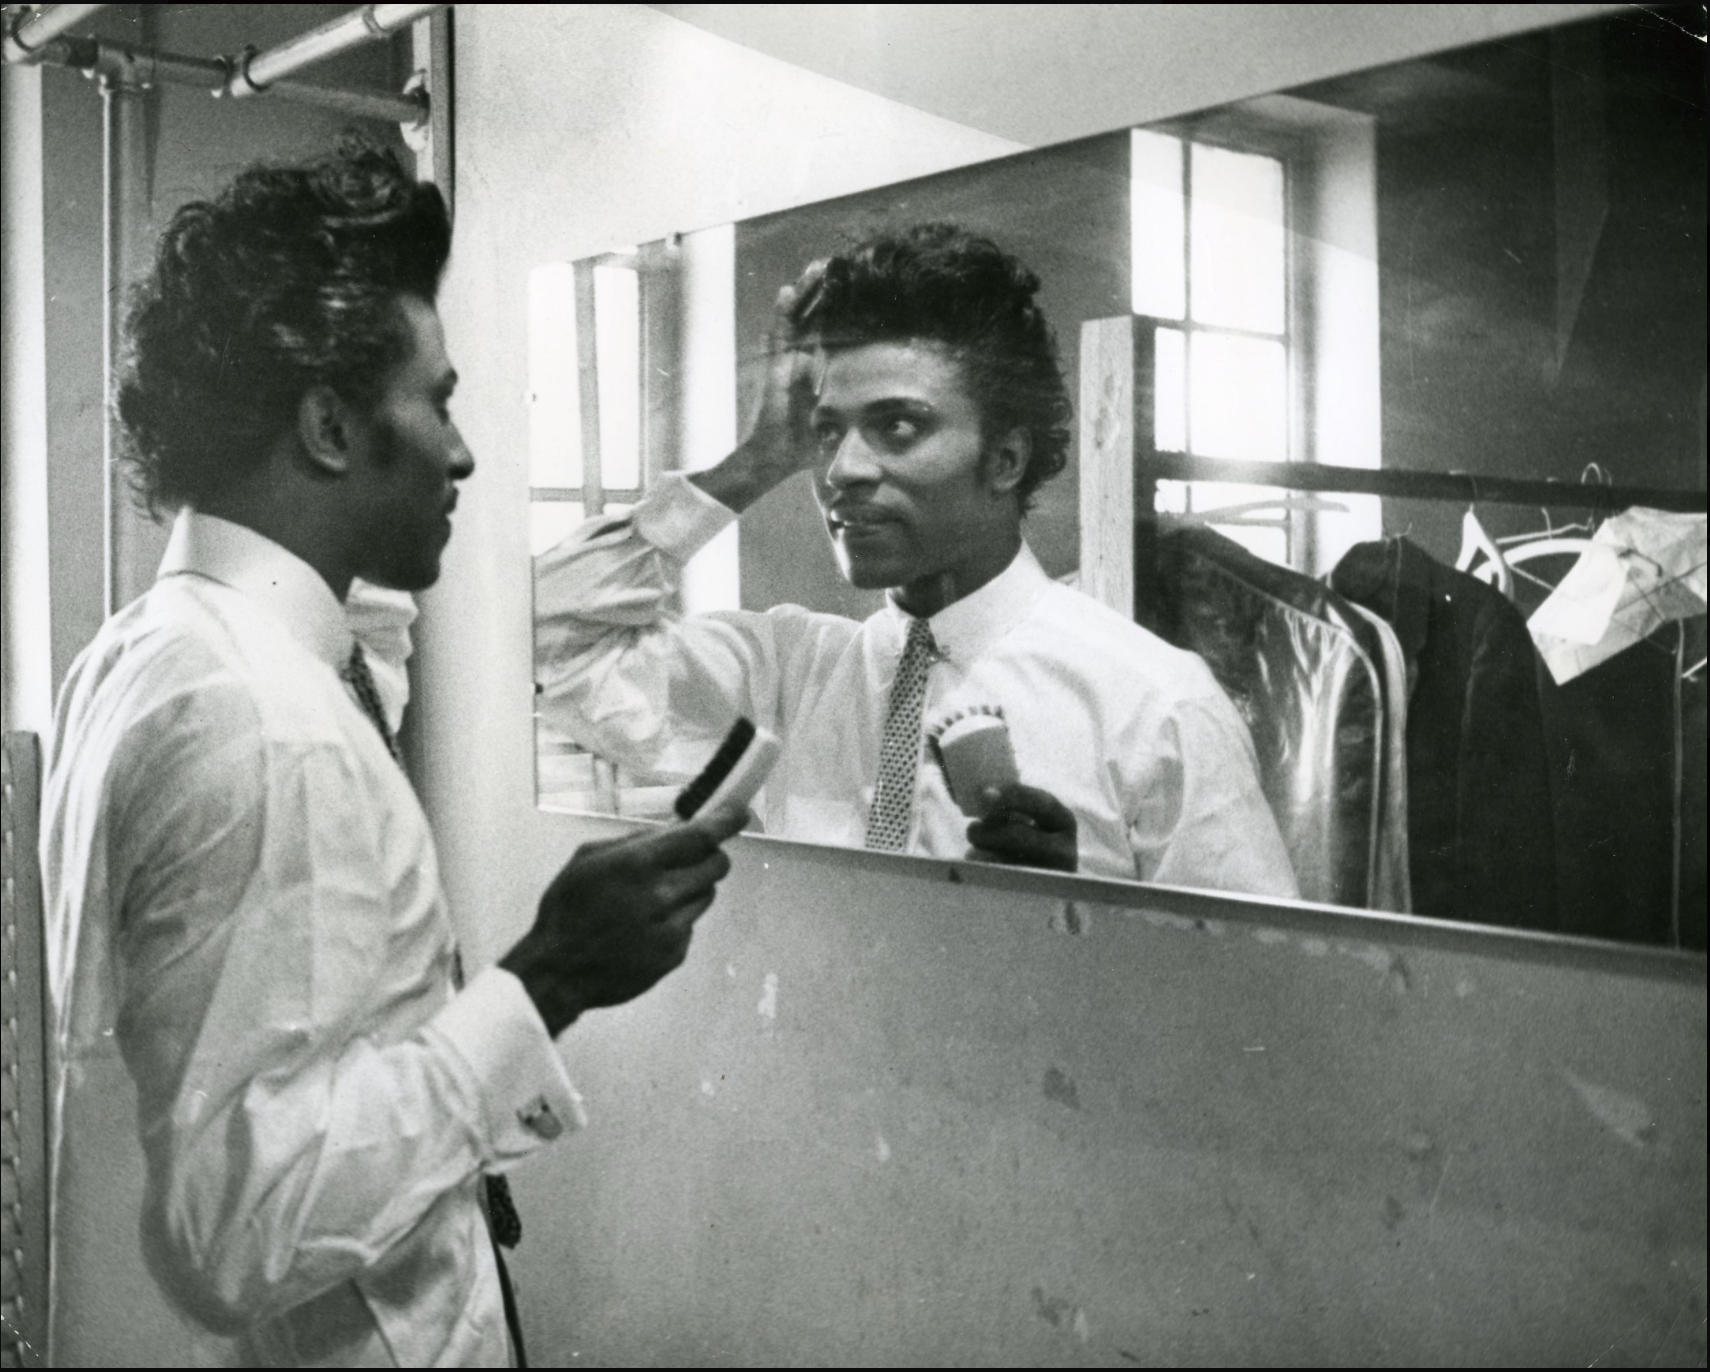 ‘Little Richard: I Am Everything’: Oscar-Contending Doc On Architect Of Rock N’ Roll Who Struggled To Unify Queer, Religious Identities